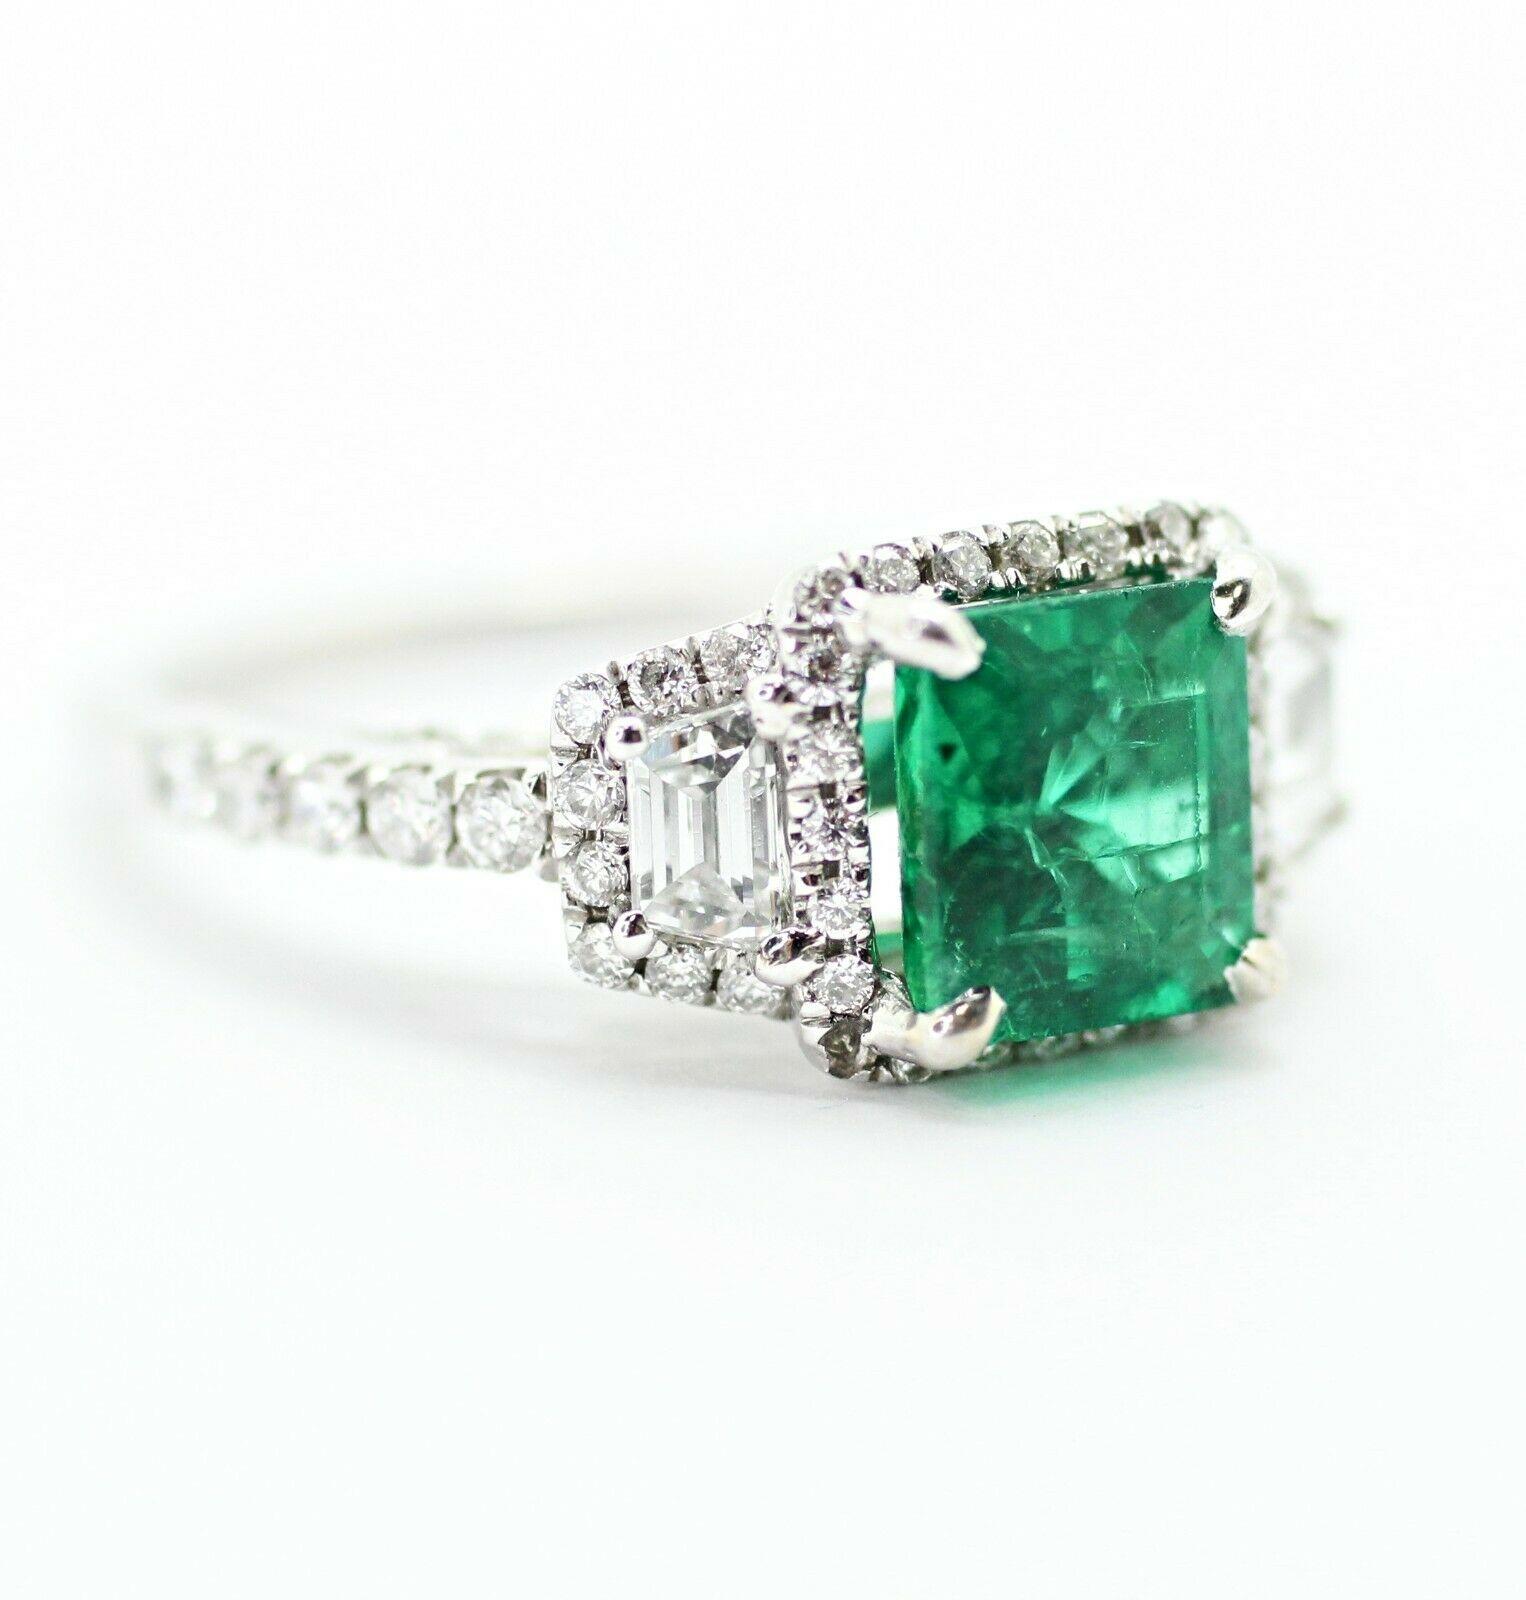  Specifications:
    main stone: RECTANGLE EMERALD APPROX 1.27CARAT
    DIAMONDS:  EMERALD/ROUND DIAM APPRX 0.95CTW
    carat total weight: APPROX 2.22CTW
    color: G/GREEN
    clarity: SI1
    brand: NONE
    metal: 18K WHITE GOLD
    type: RING
 